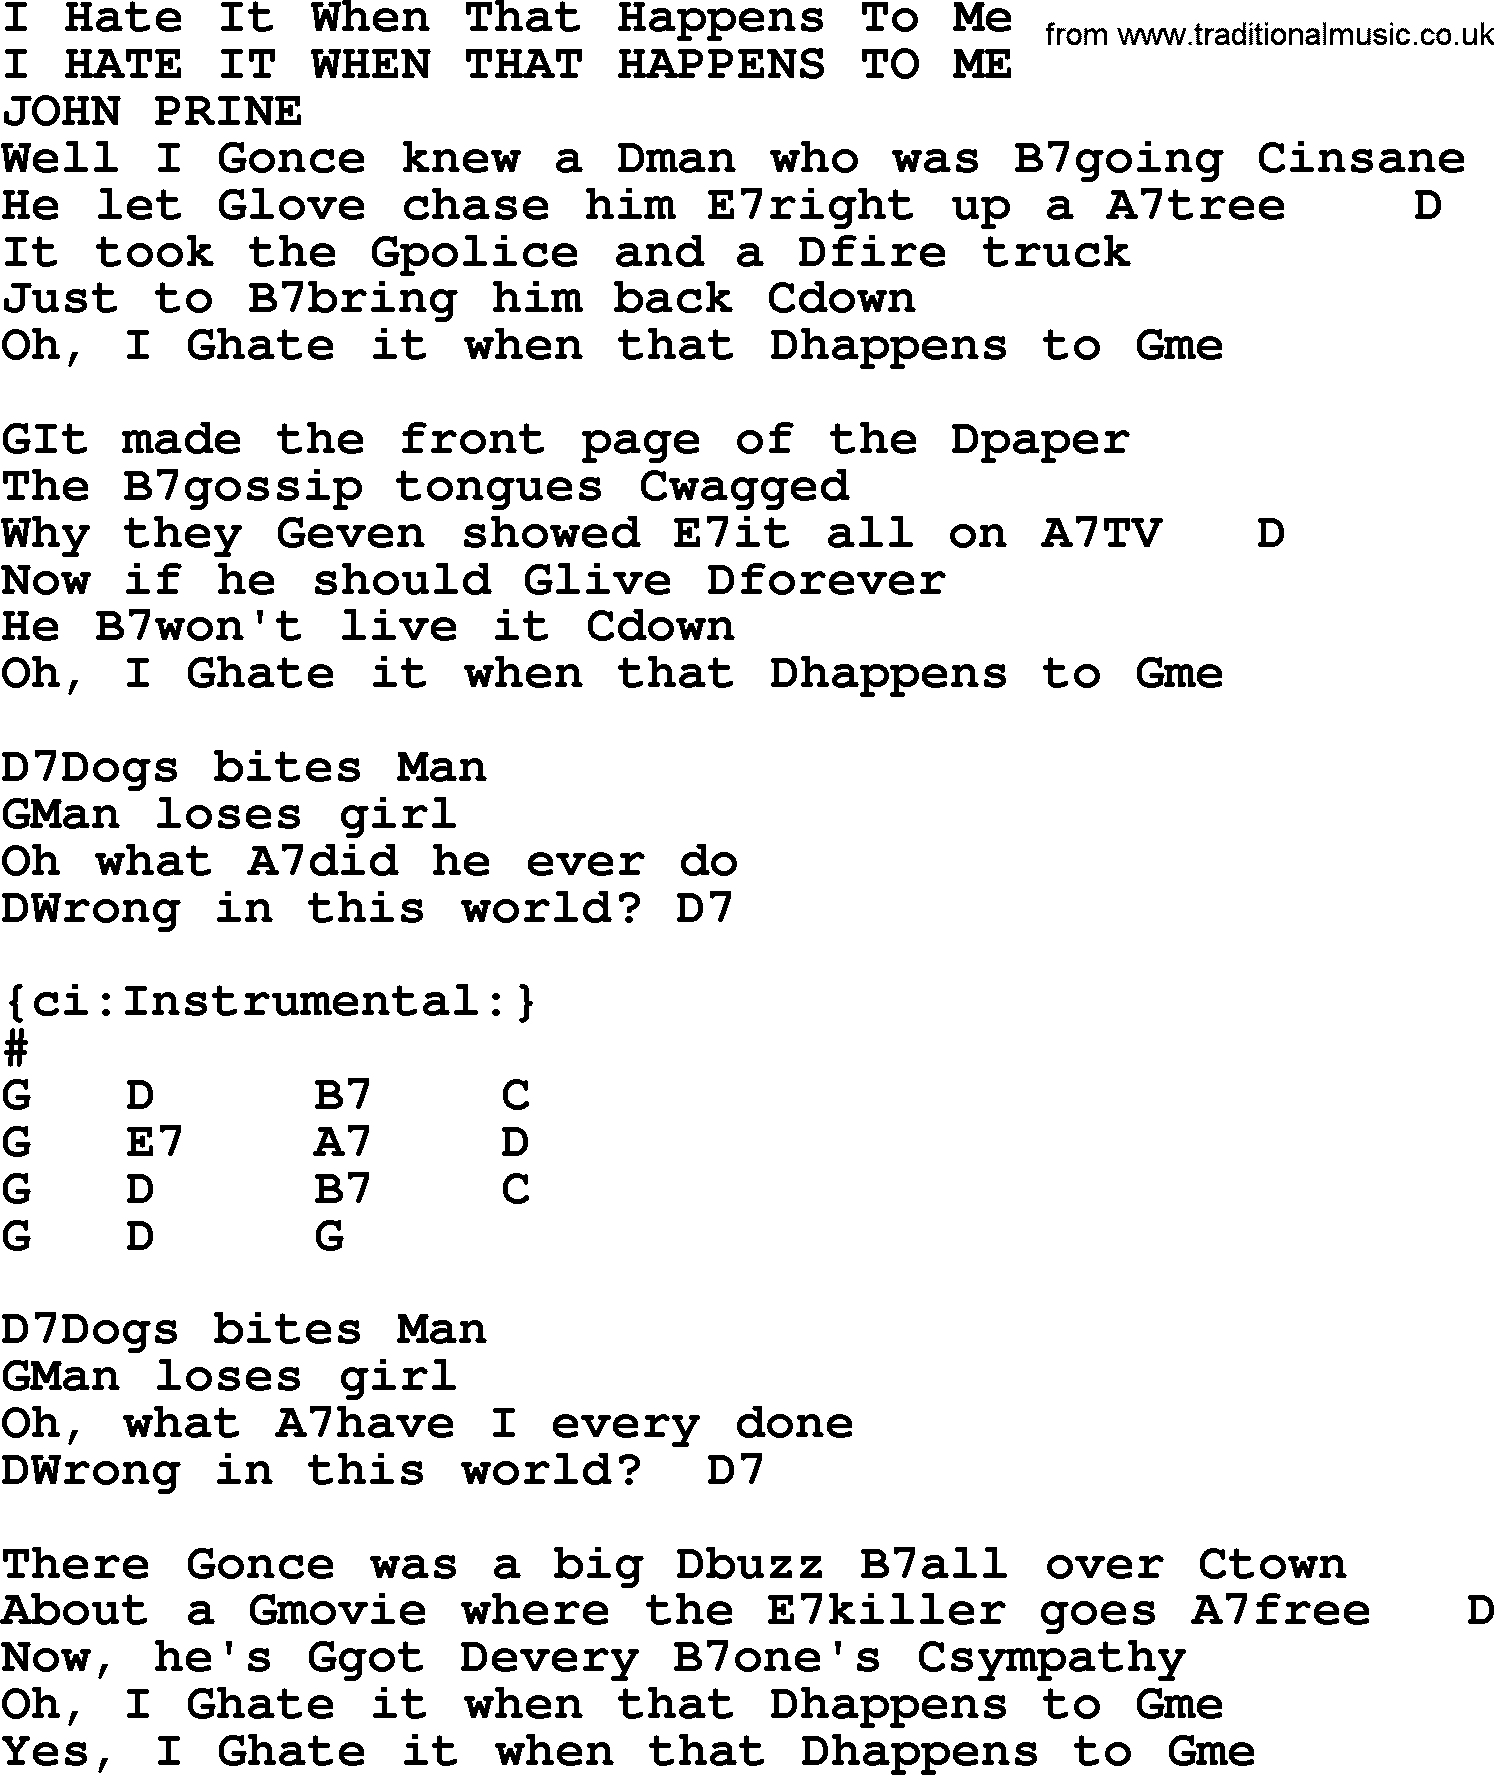 Bluegrass song: I Hate It When That Happens To Me, lyrics and chords